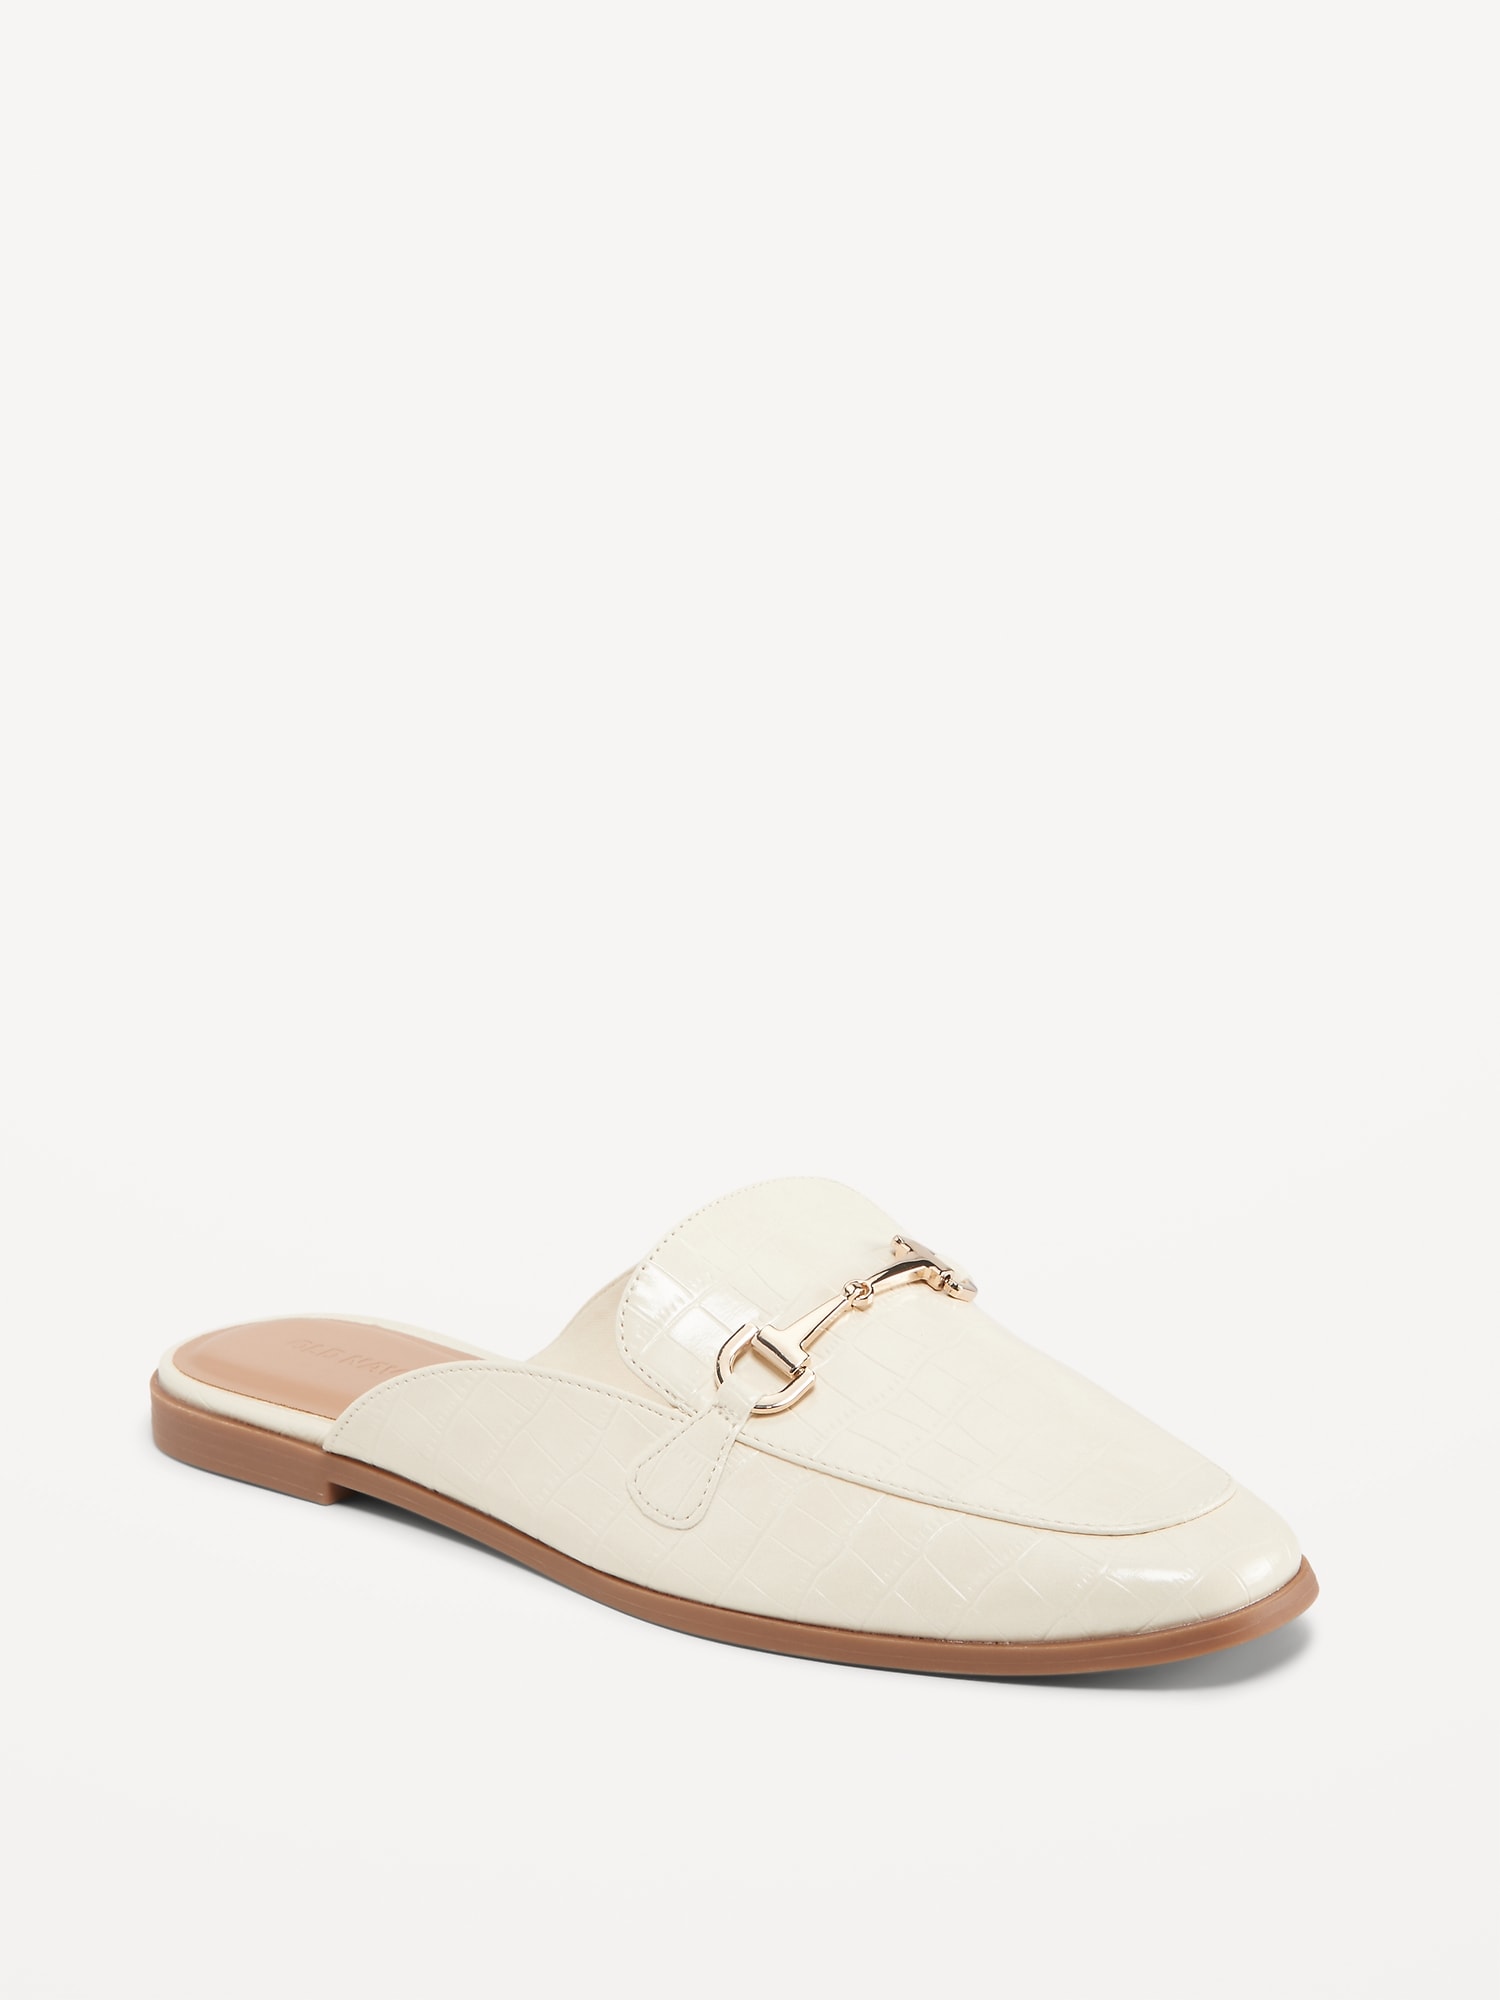 Faux-Leather Loafer Mule Shoes for Women | Old Navy